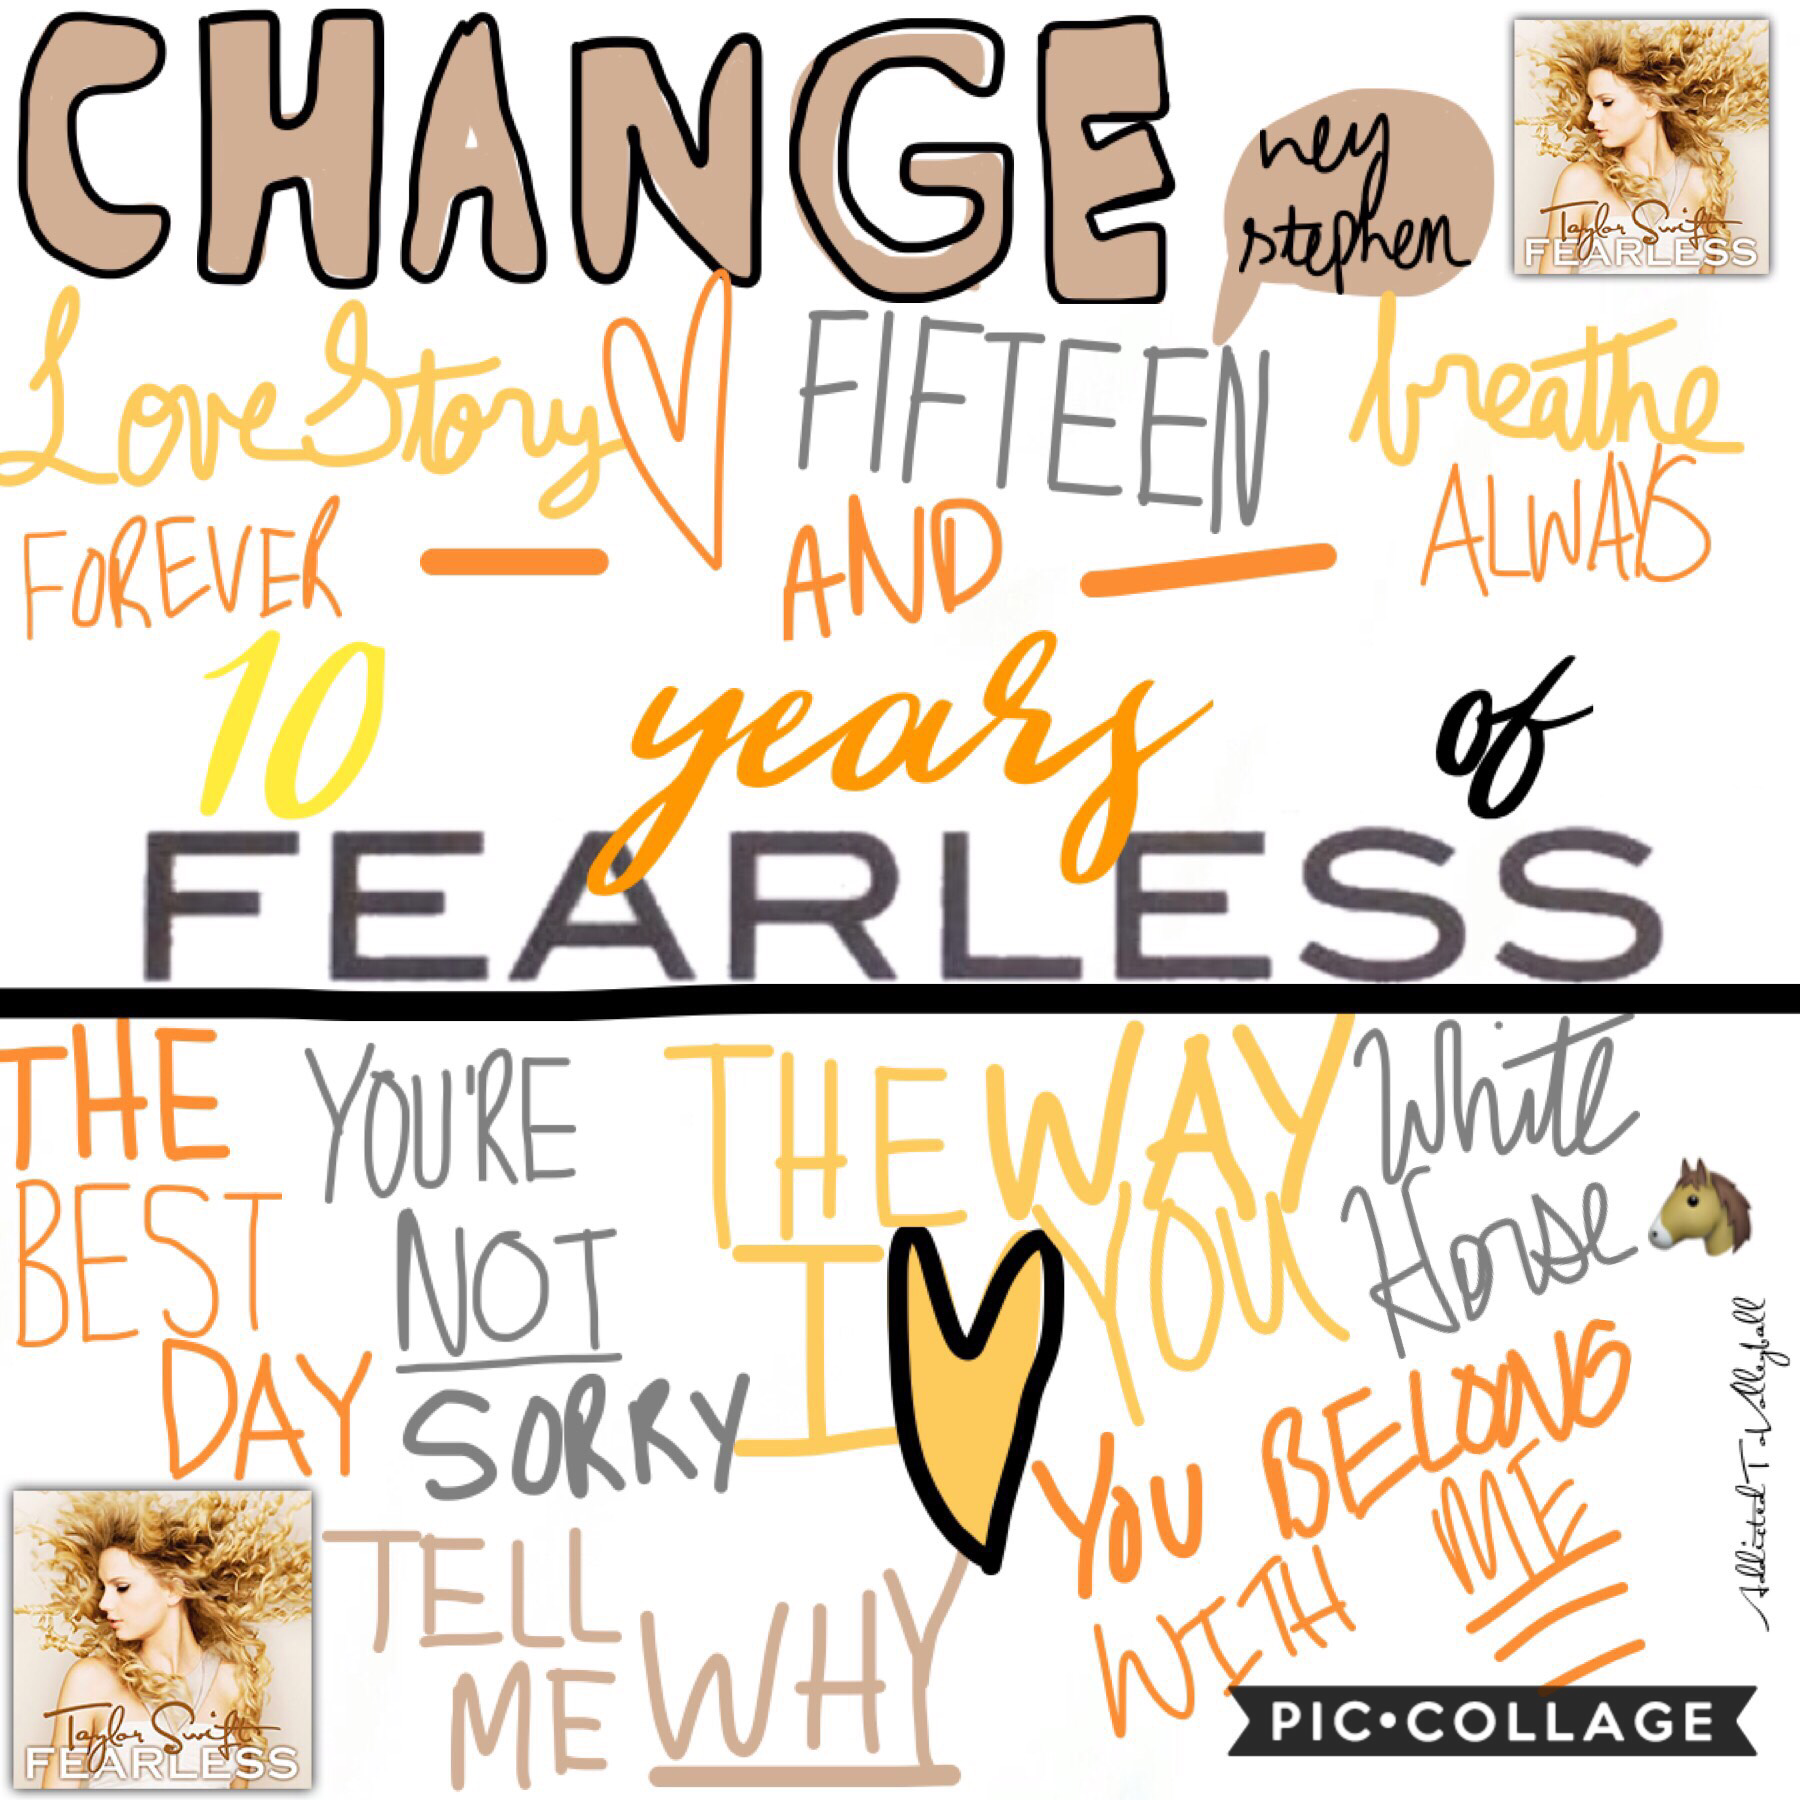 11-11-18 - 10 years of Fearless - tap!
10 years.. I’m so emotional! Fearless is what made me a Swiftie! Time has flown by. ♥️
meanwhile I hate this! 😂 the doodles took forever 😂
QOTD in Comments 🐍